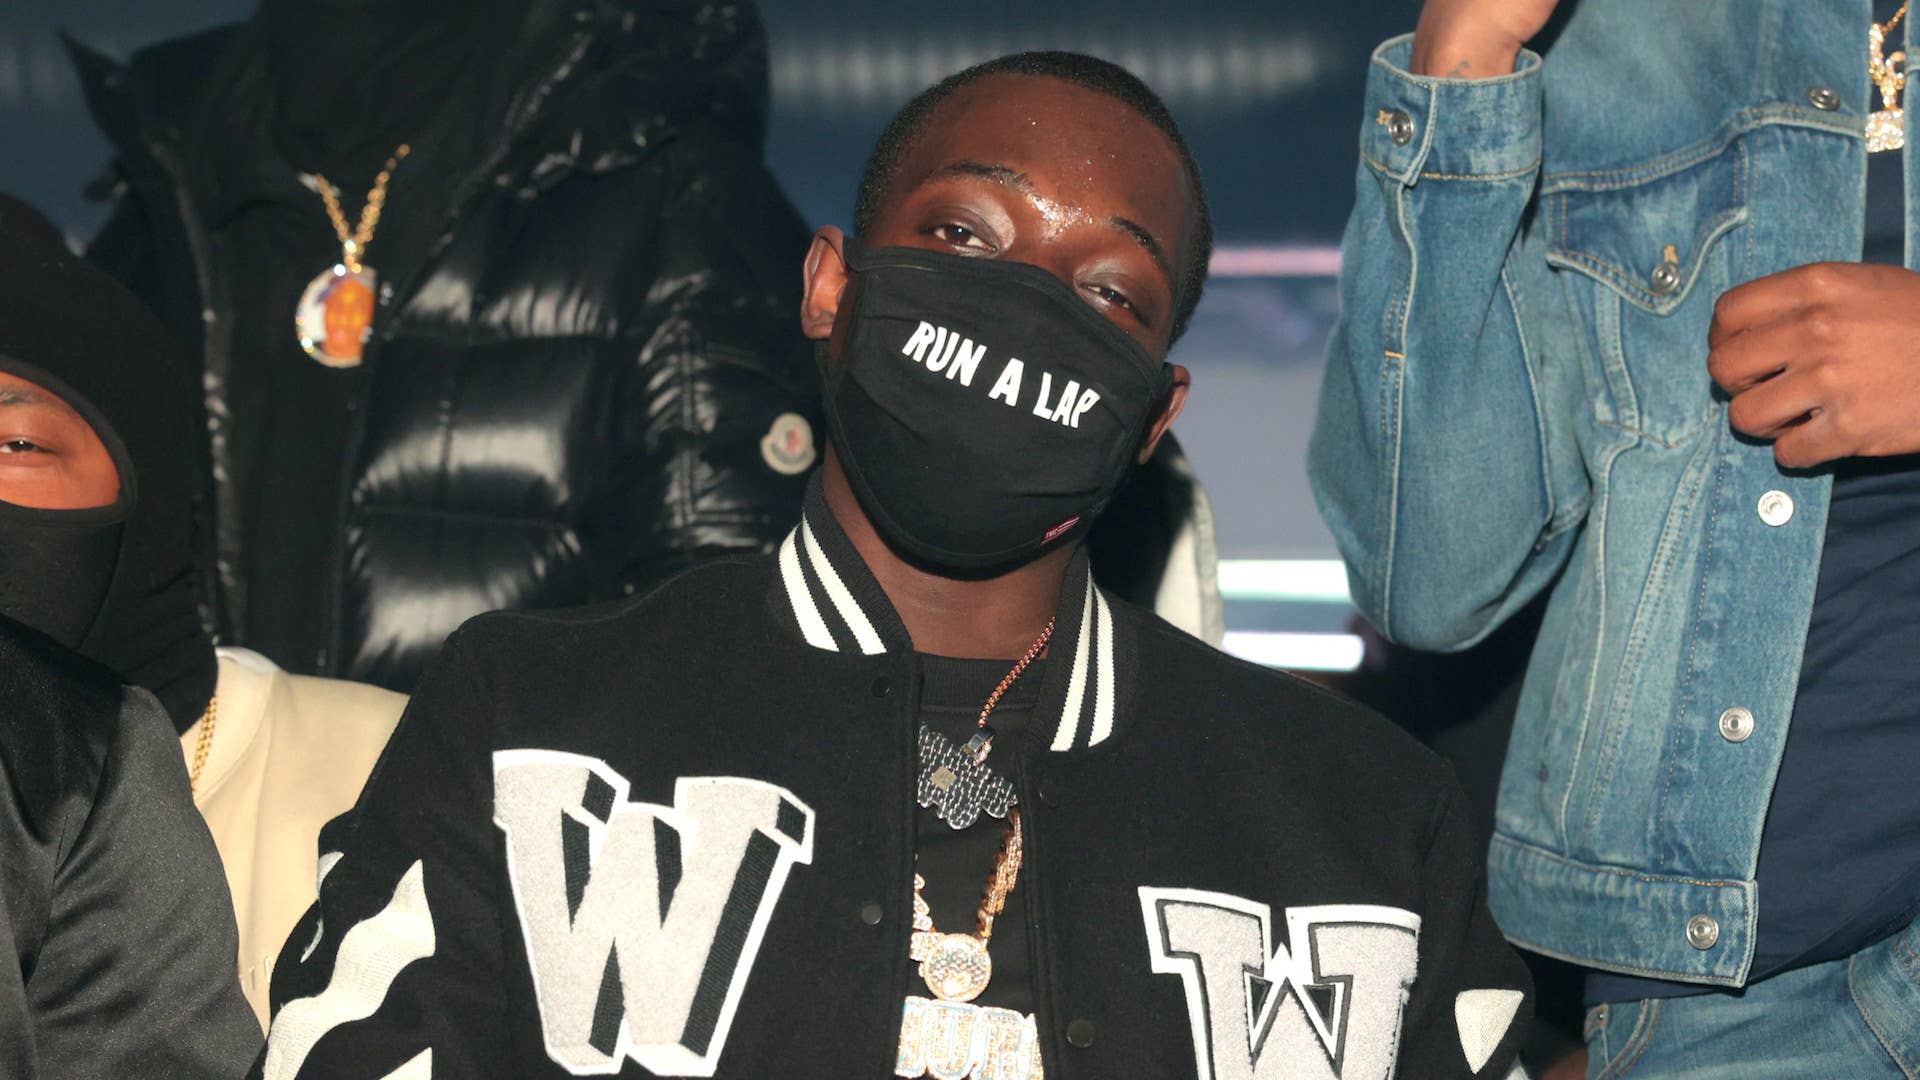 Bobby Shmurda attends a Day Party at Republic Lounge